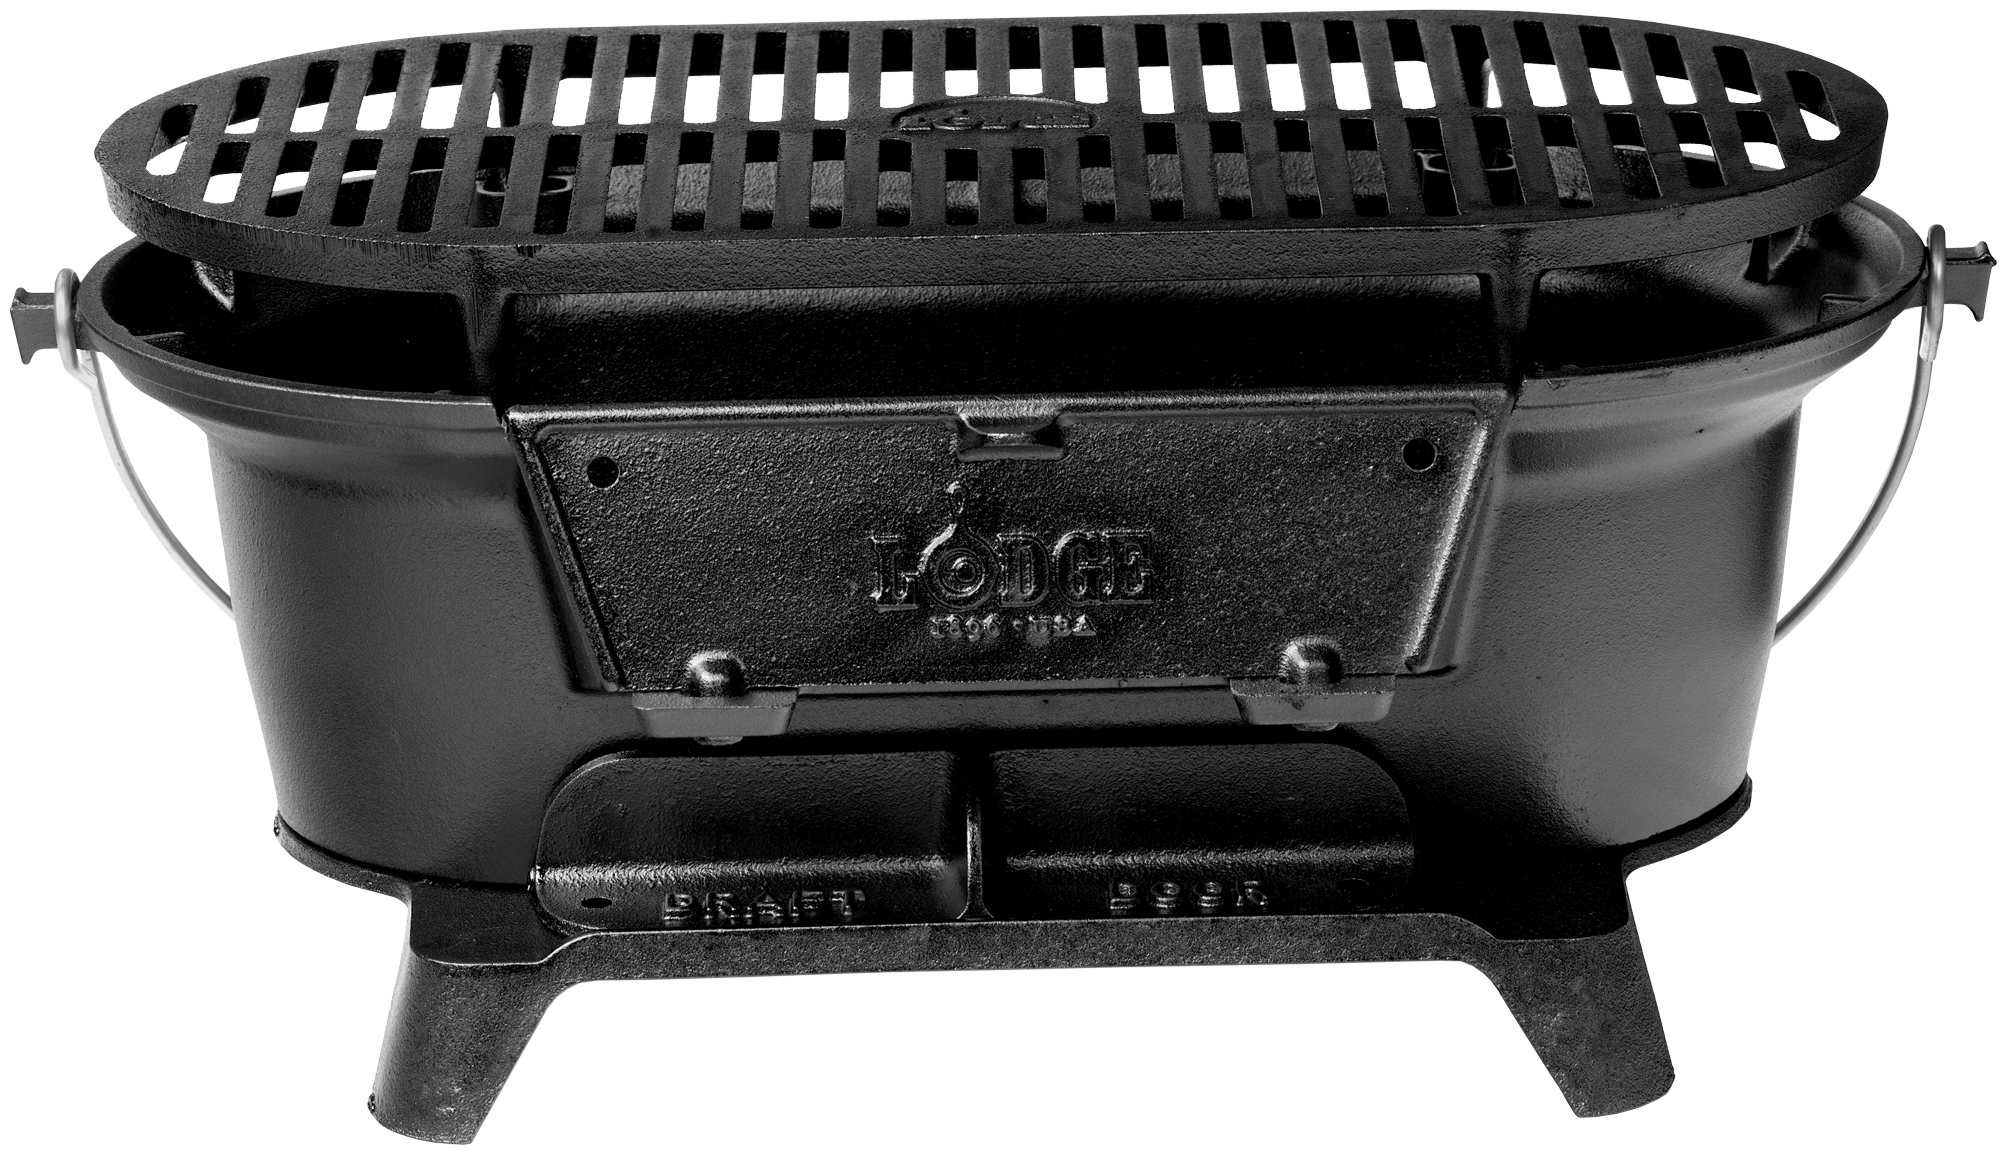 Review: The Lodge Cast Iron Sportsman's Grill - ITRH Urban Survival